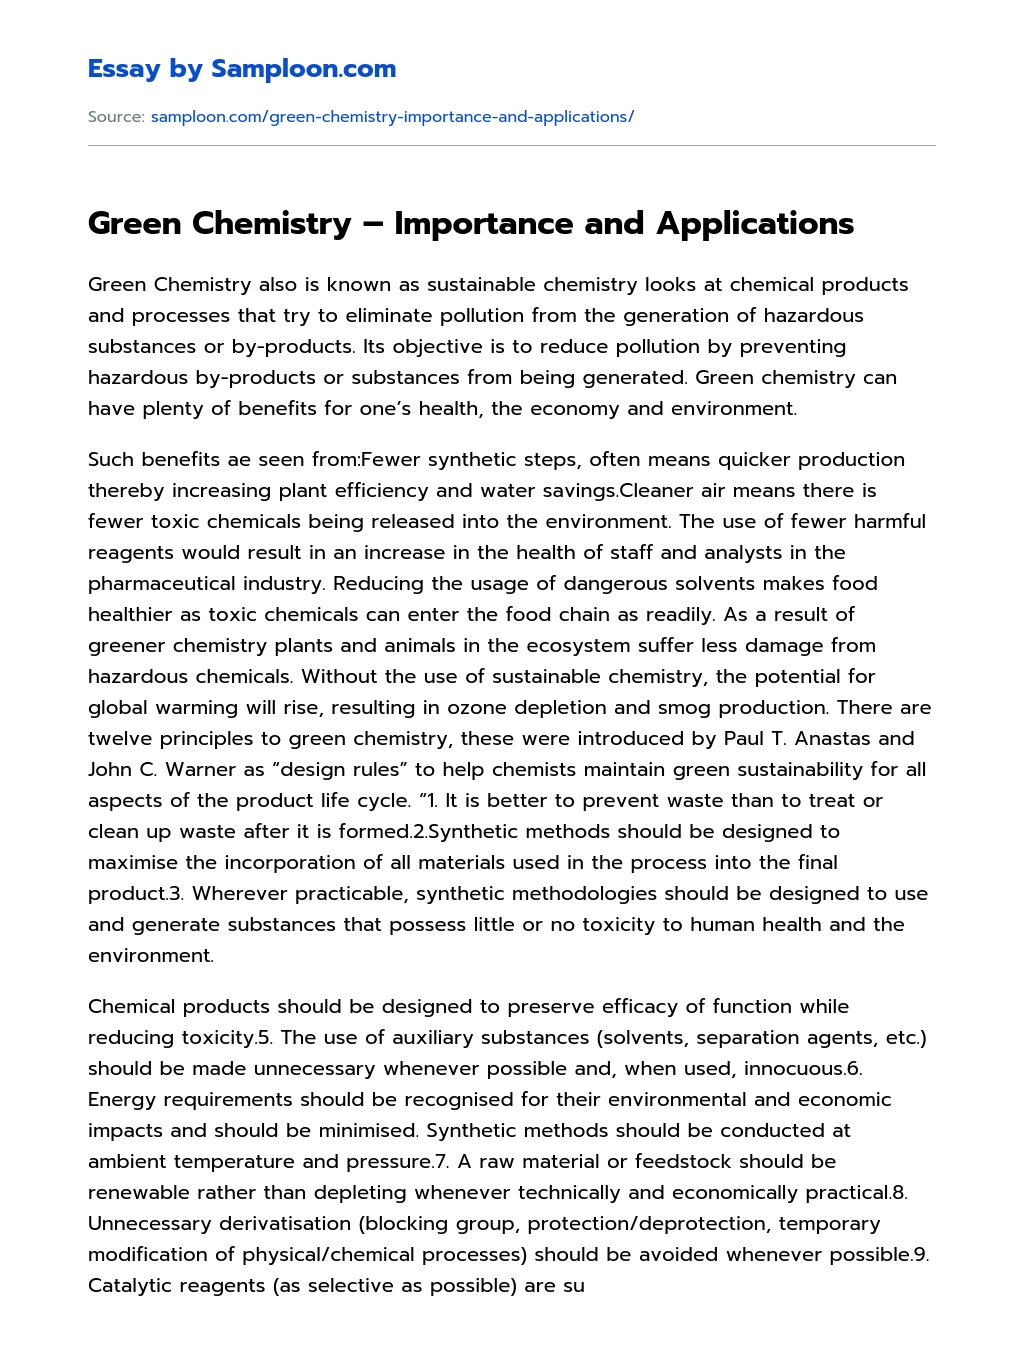 Green Chemistry – Importance and Applications essay